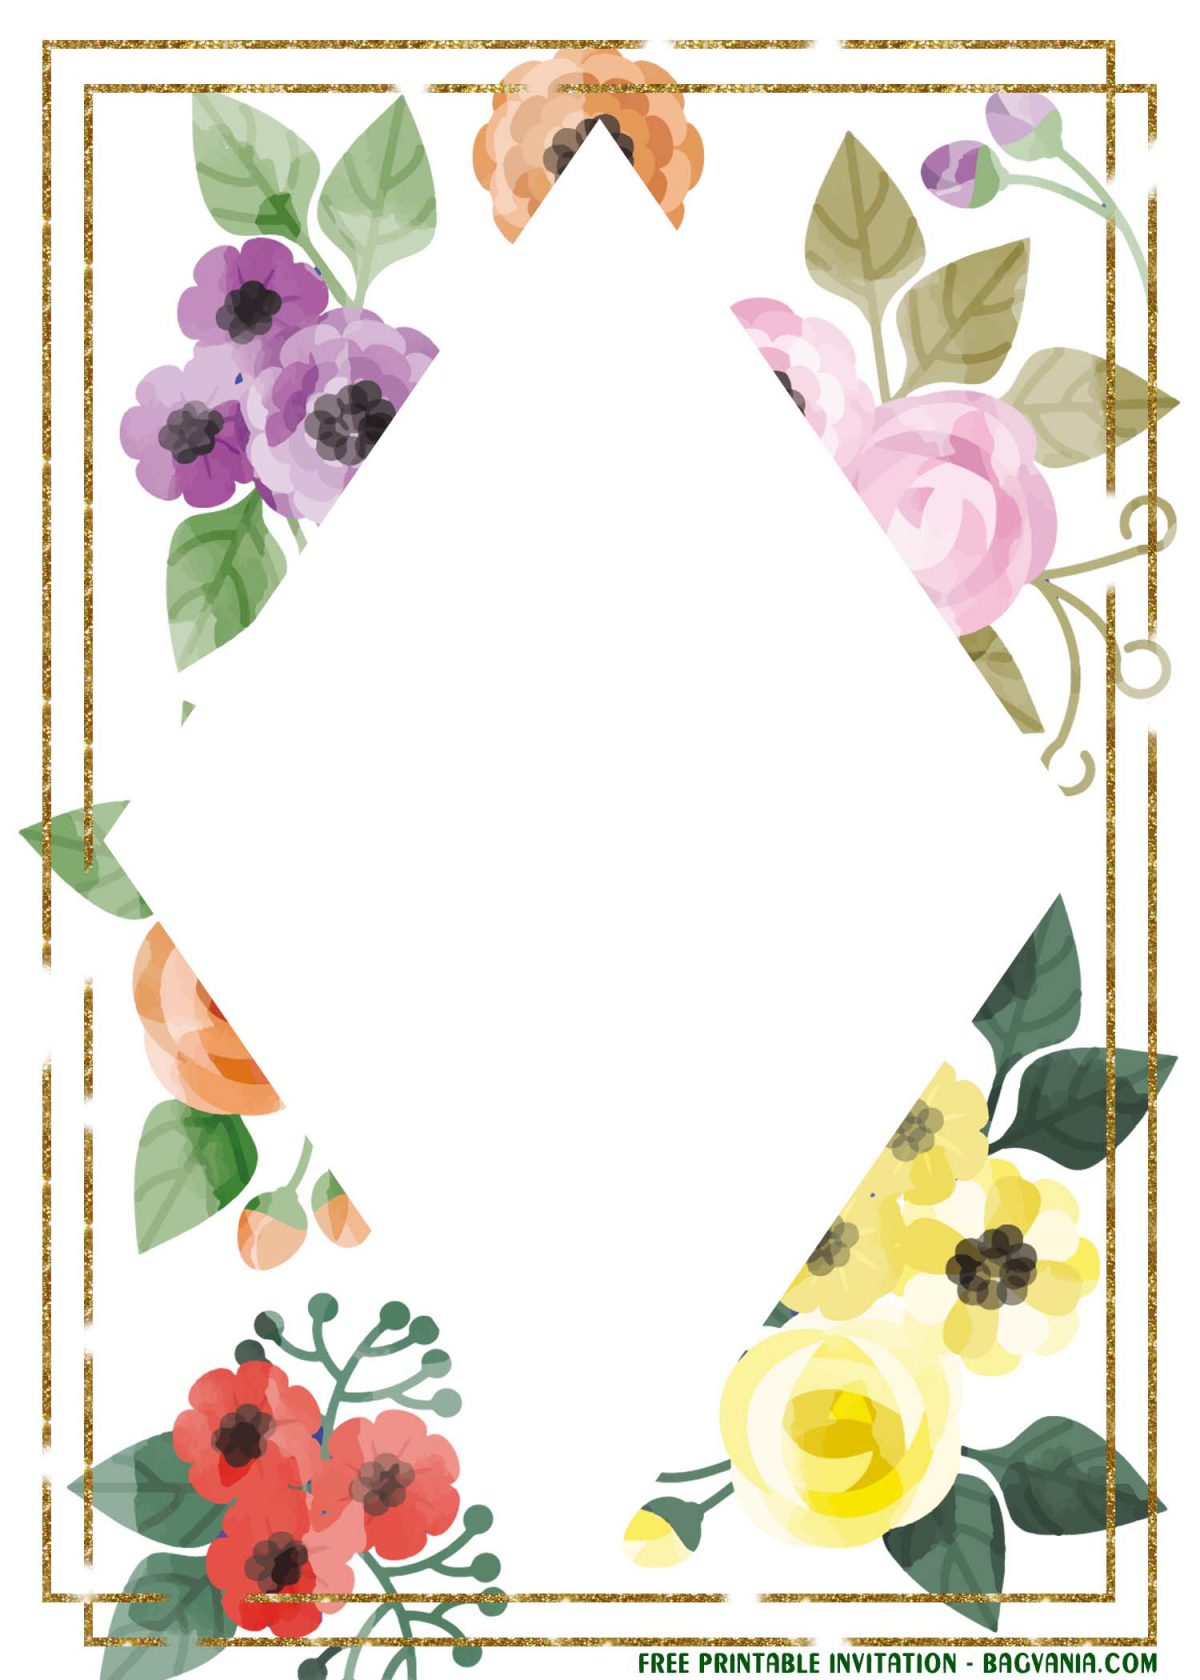 Free Printable Floral Frame Invitation Templates With Watercolor Floral